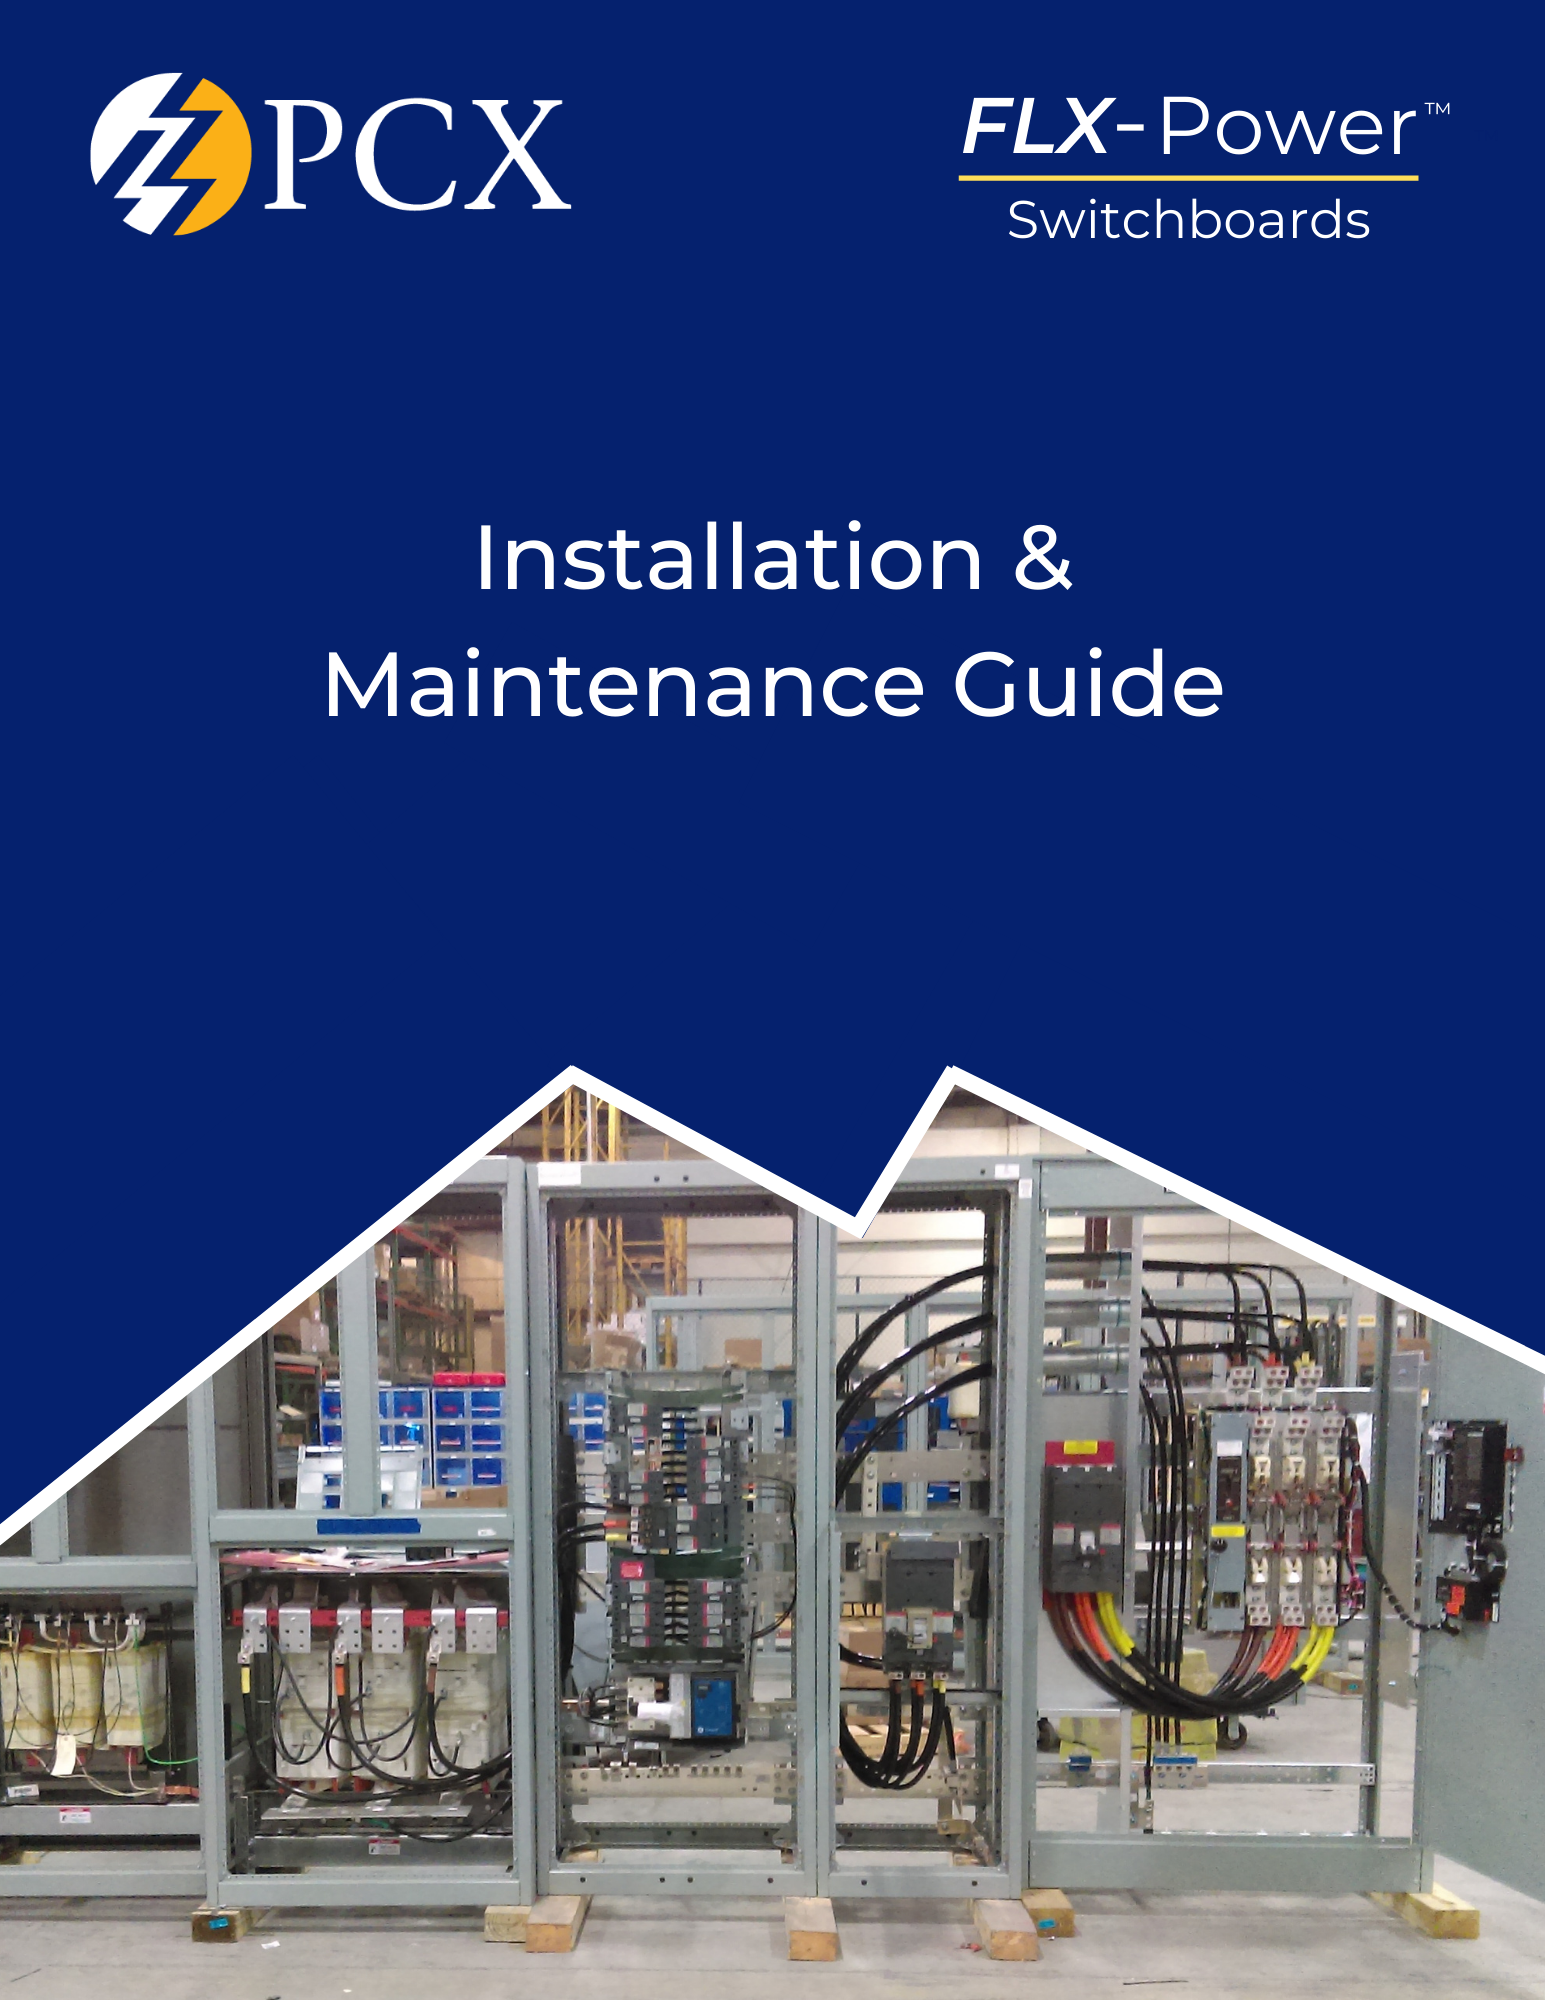 FLX-Power™ Switchboards: Installation & Maintenance Guide